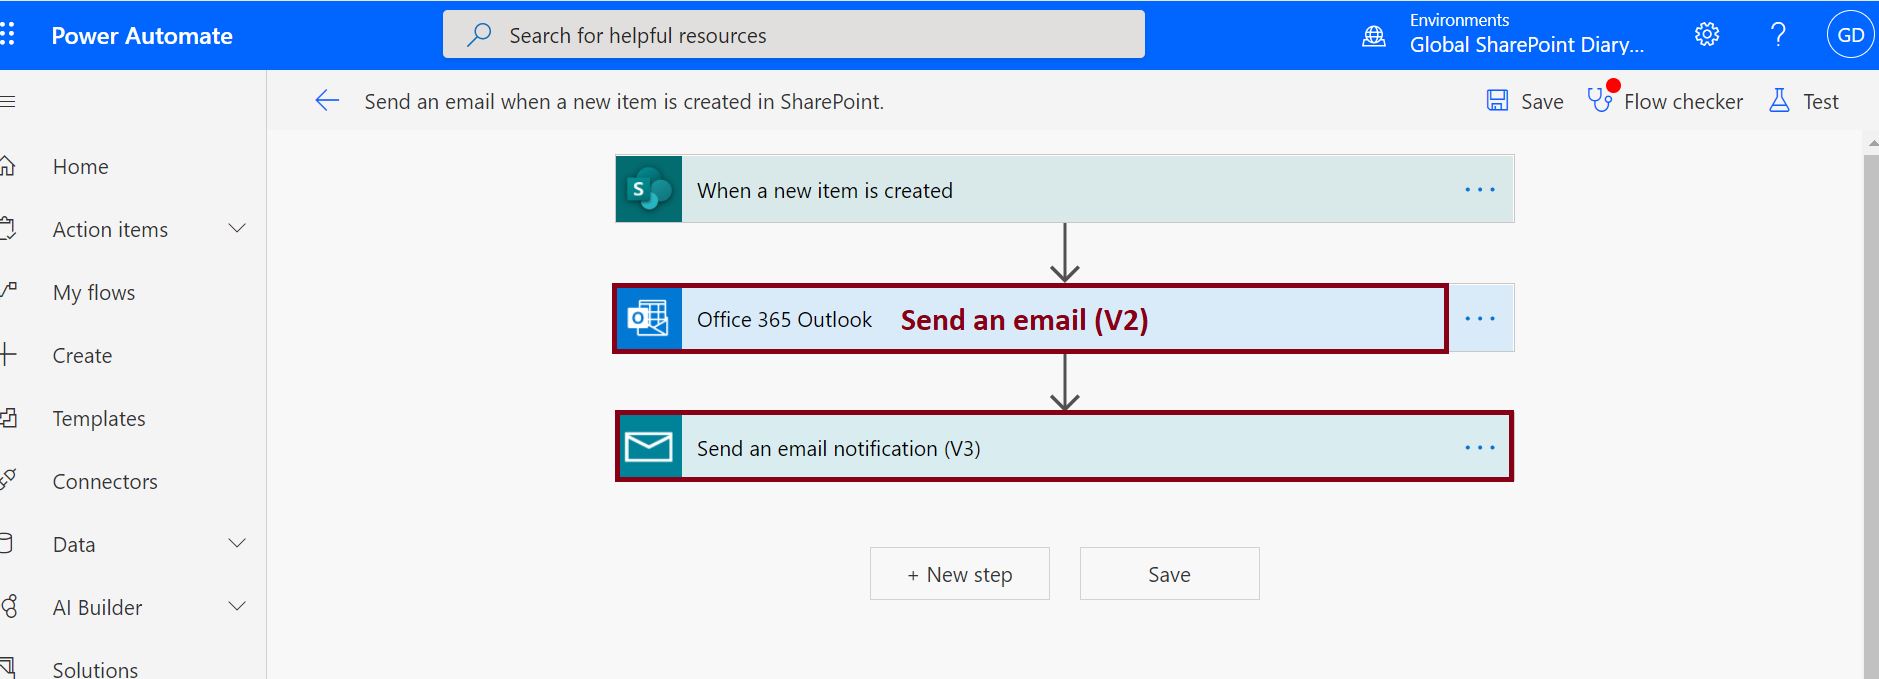 Power Automate send email, Send and email (V2) and Send an email notification(V3) Power Automate Action